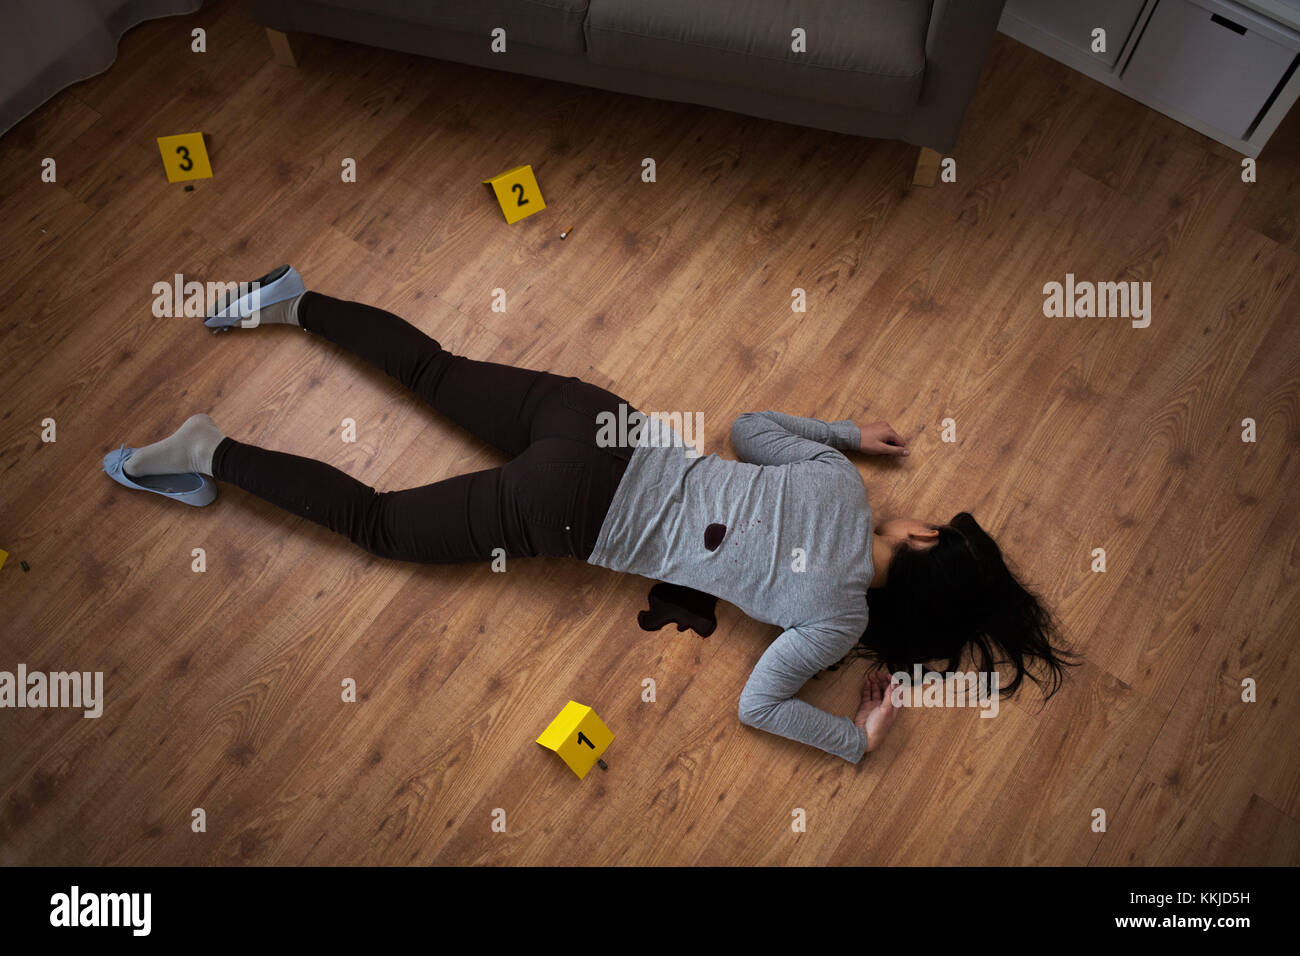 dead woman body in blood on floor at crime scene Stock Photo